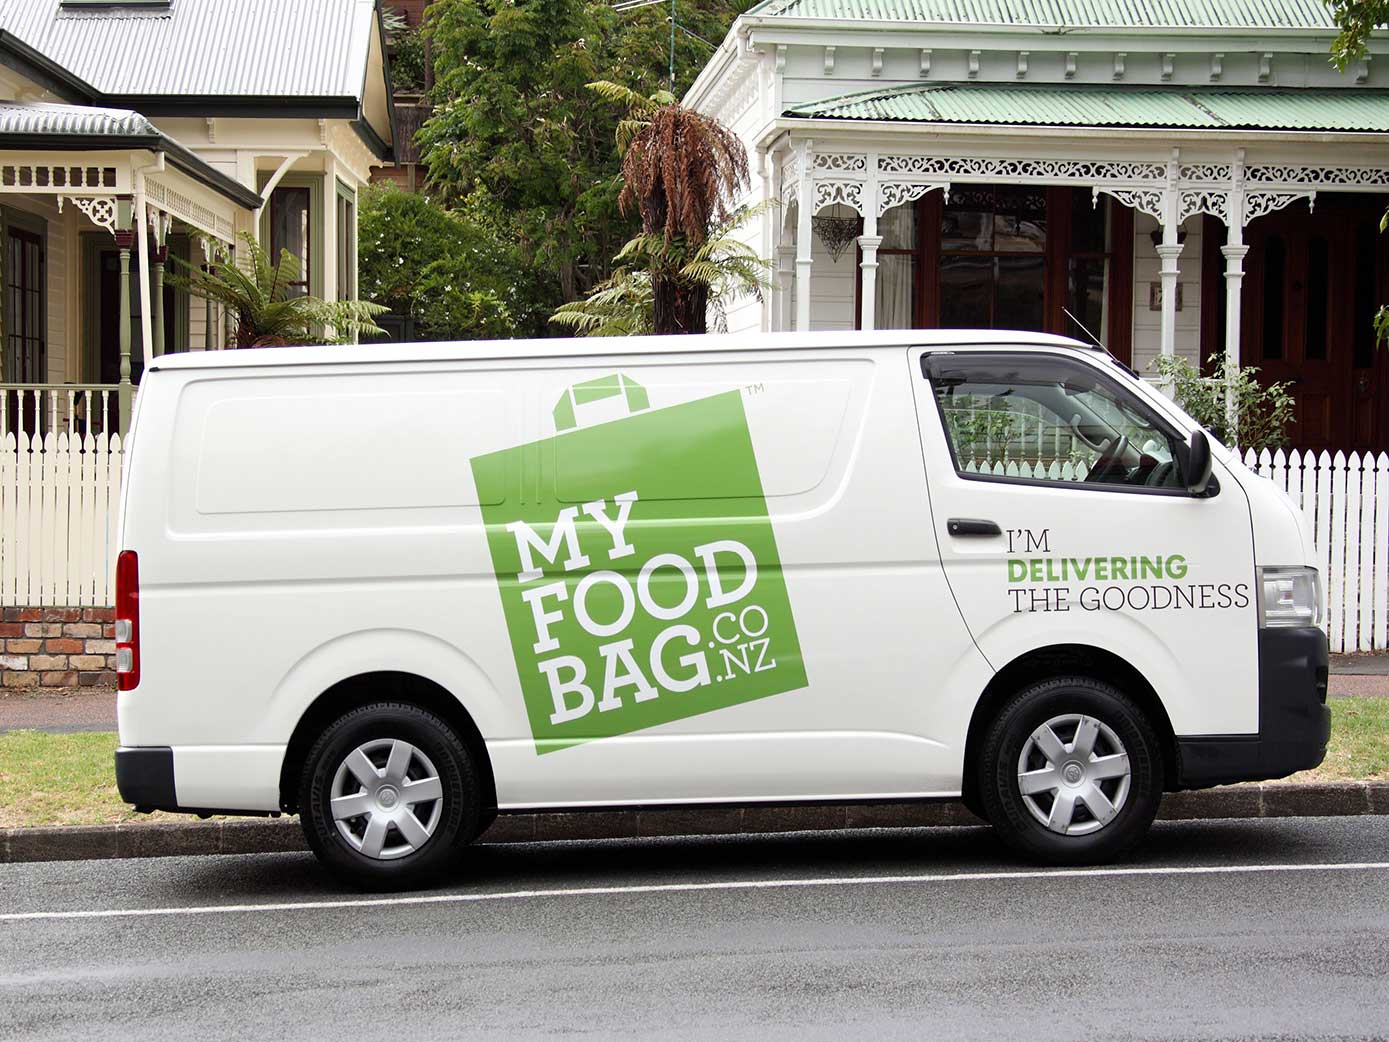 My Food Bag van stopped in front of some houses